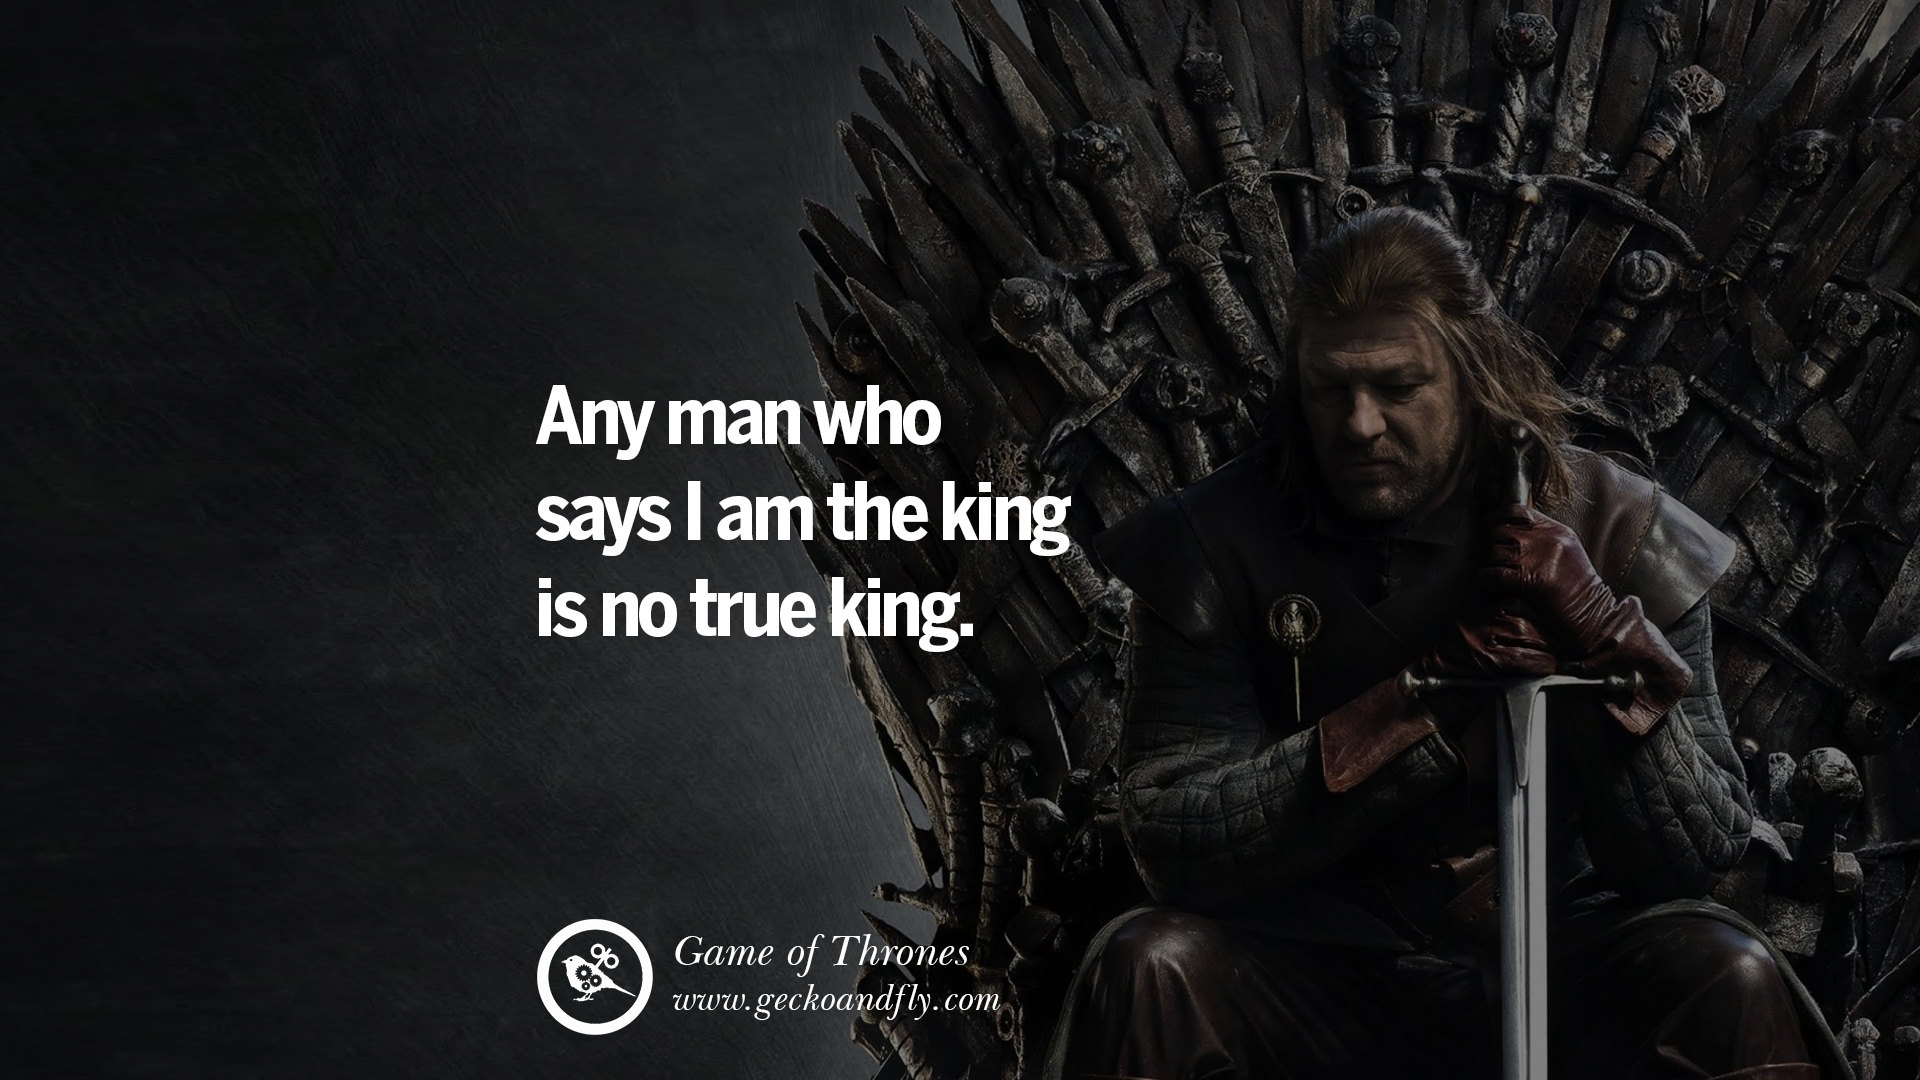 15 Memorable Game of Thrones Quotes by George Martin on Love, Death